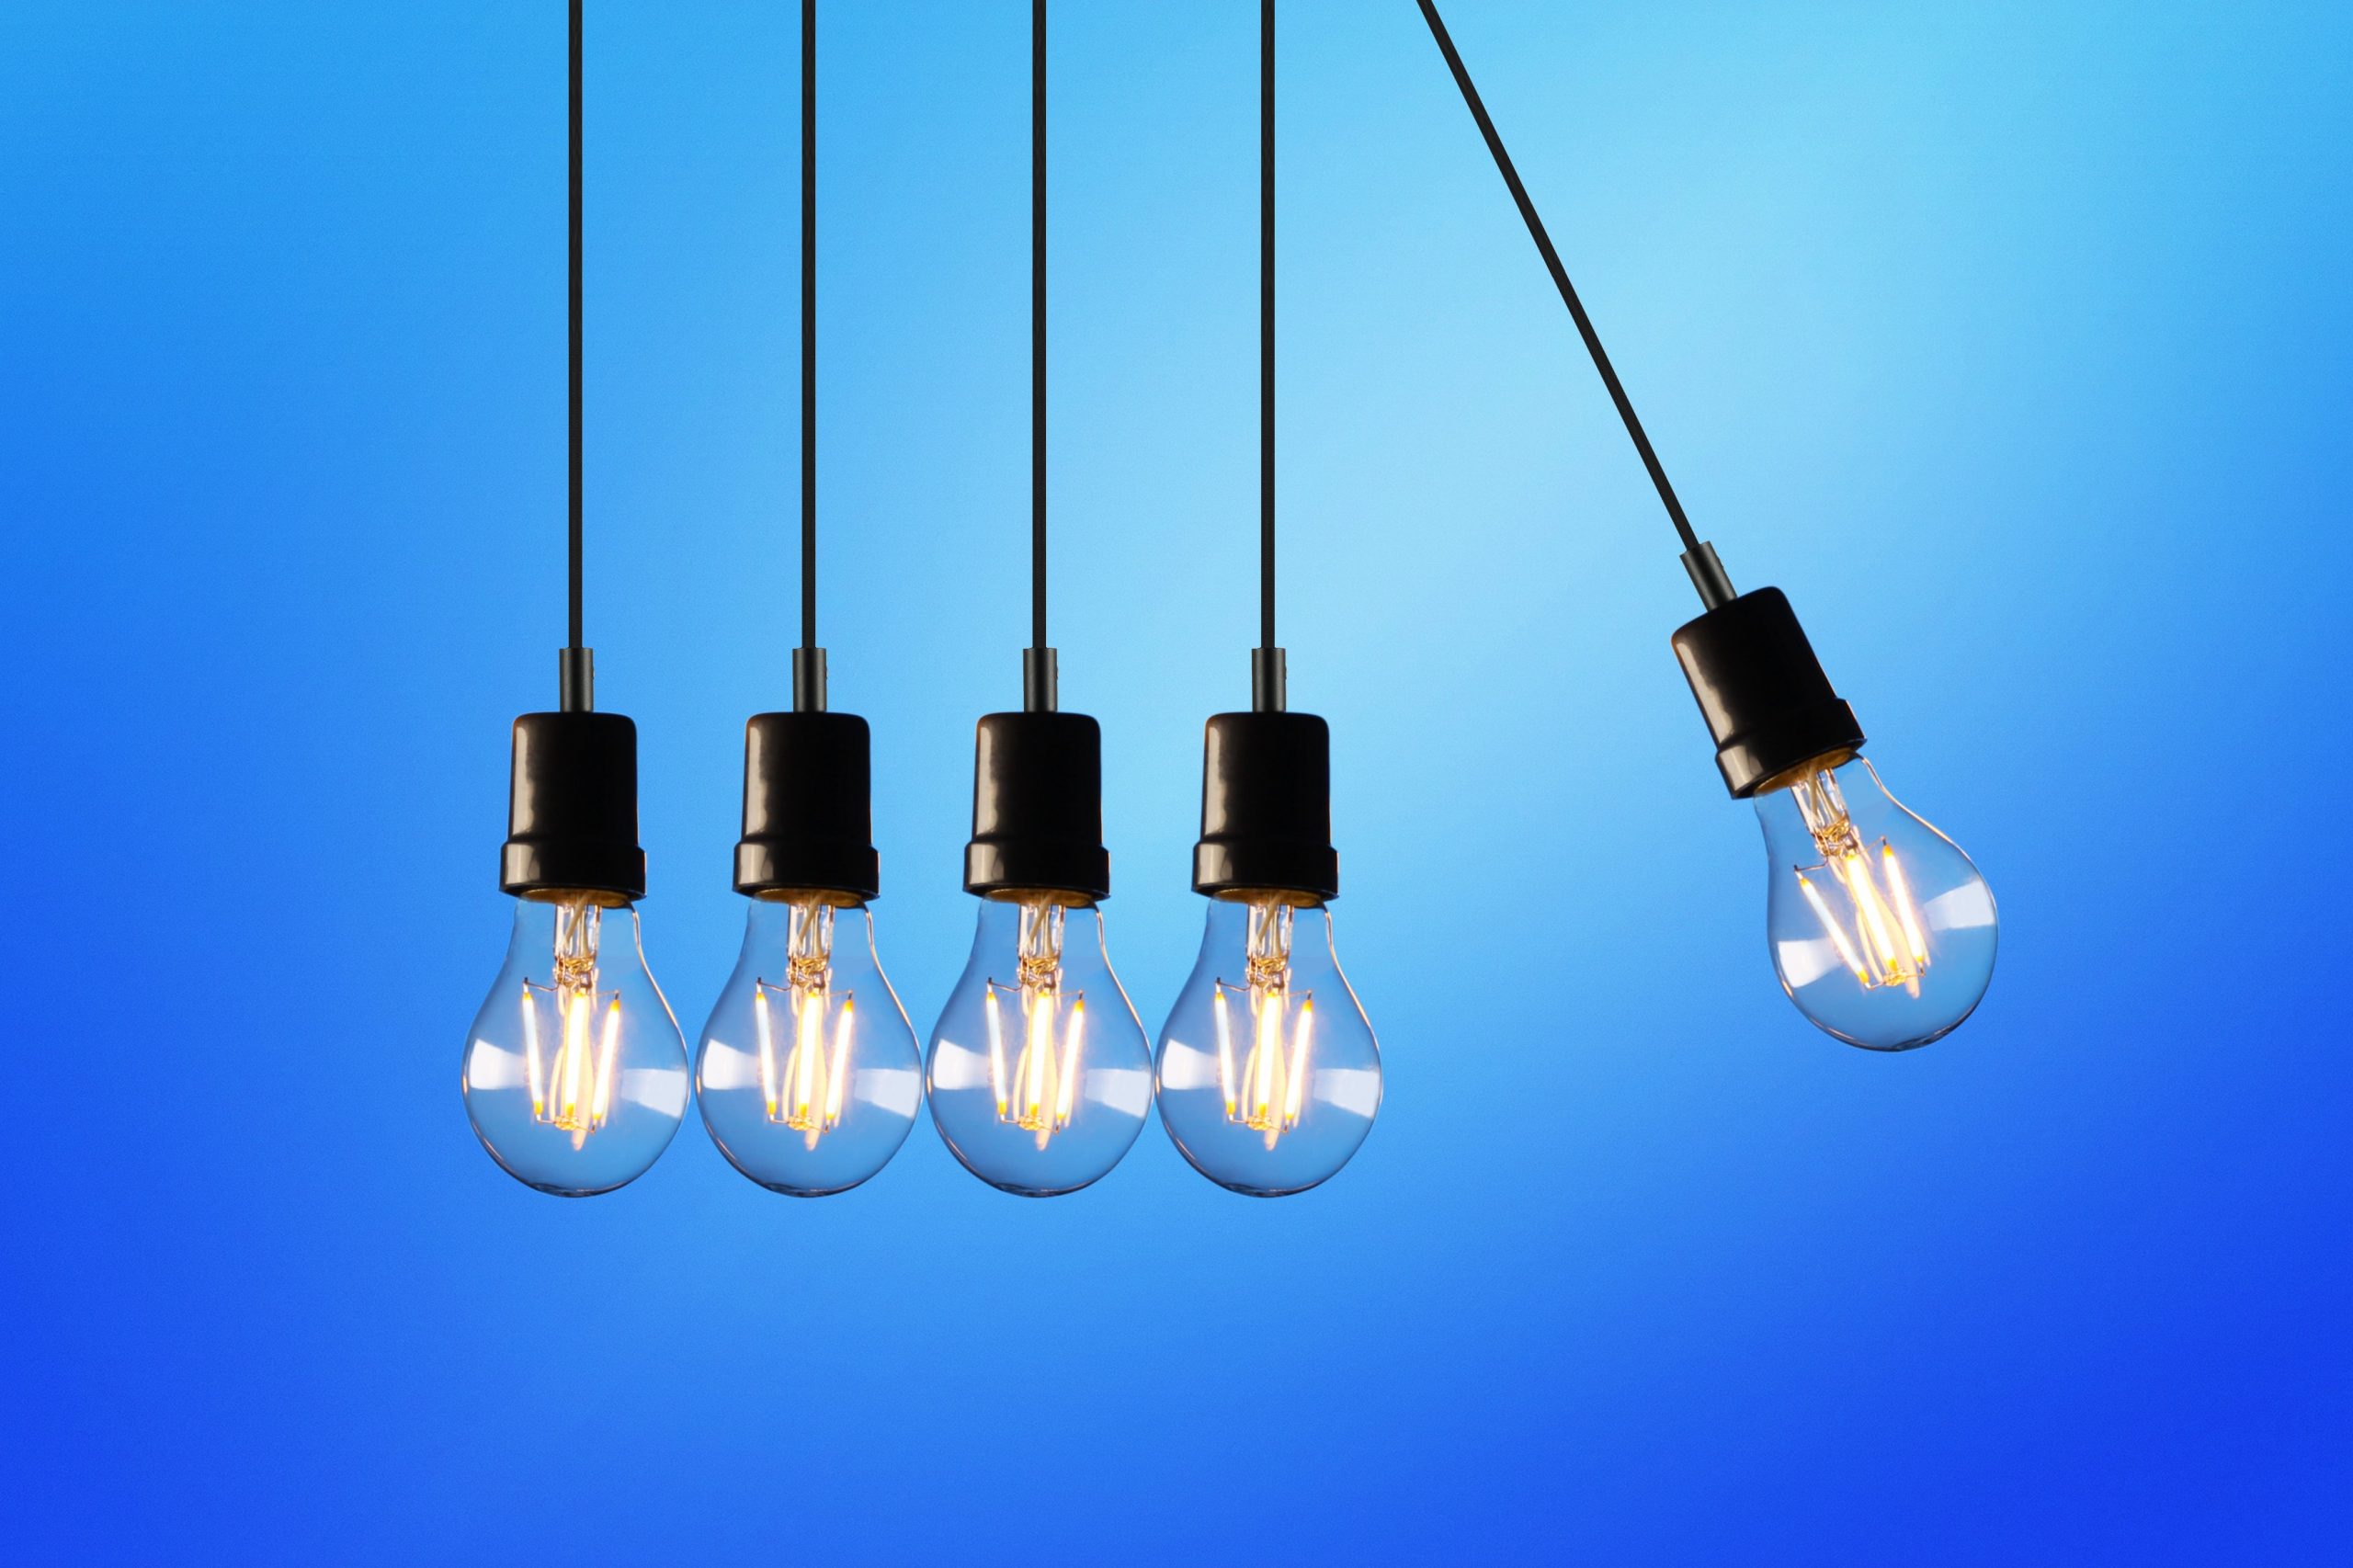 5 lightbulbs on a blue background to represent creativity in business.